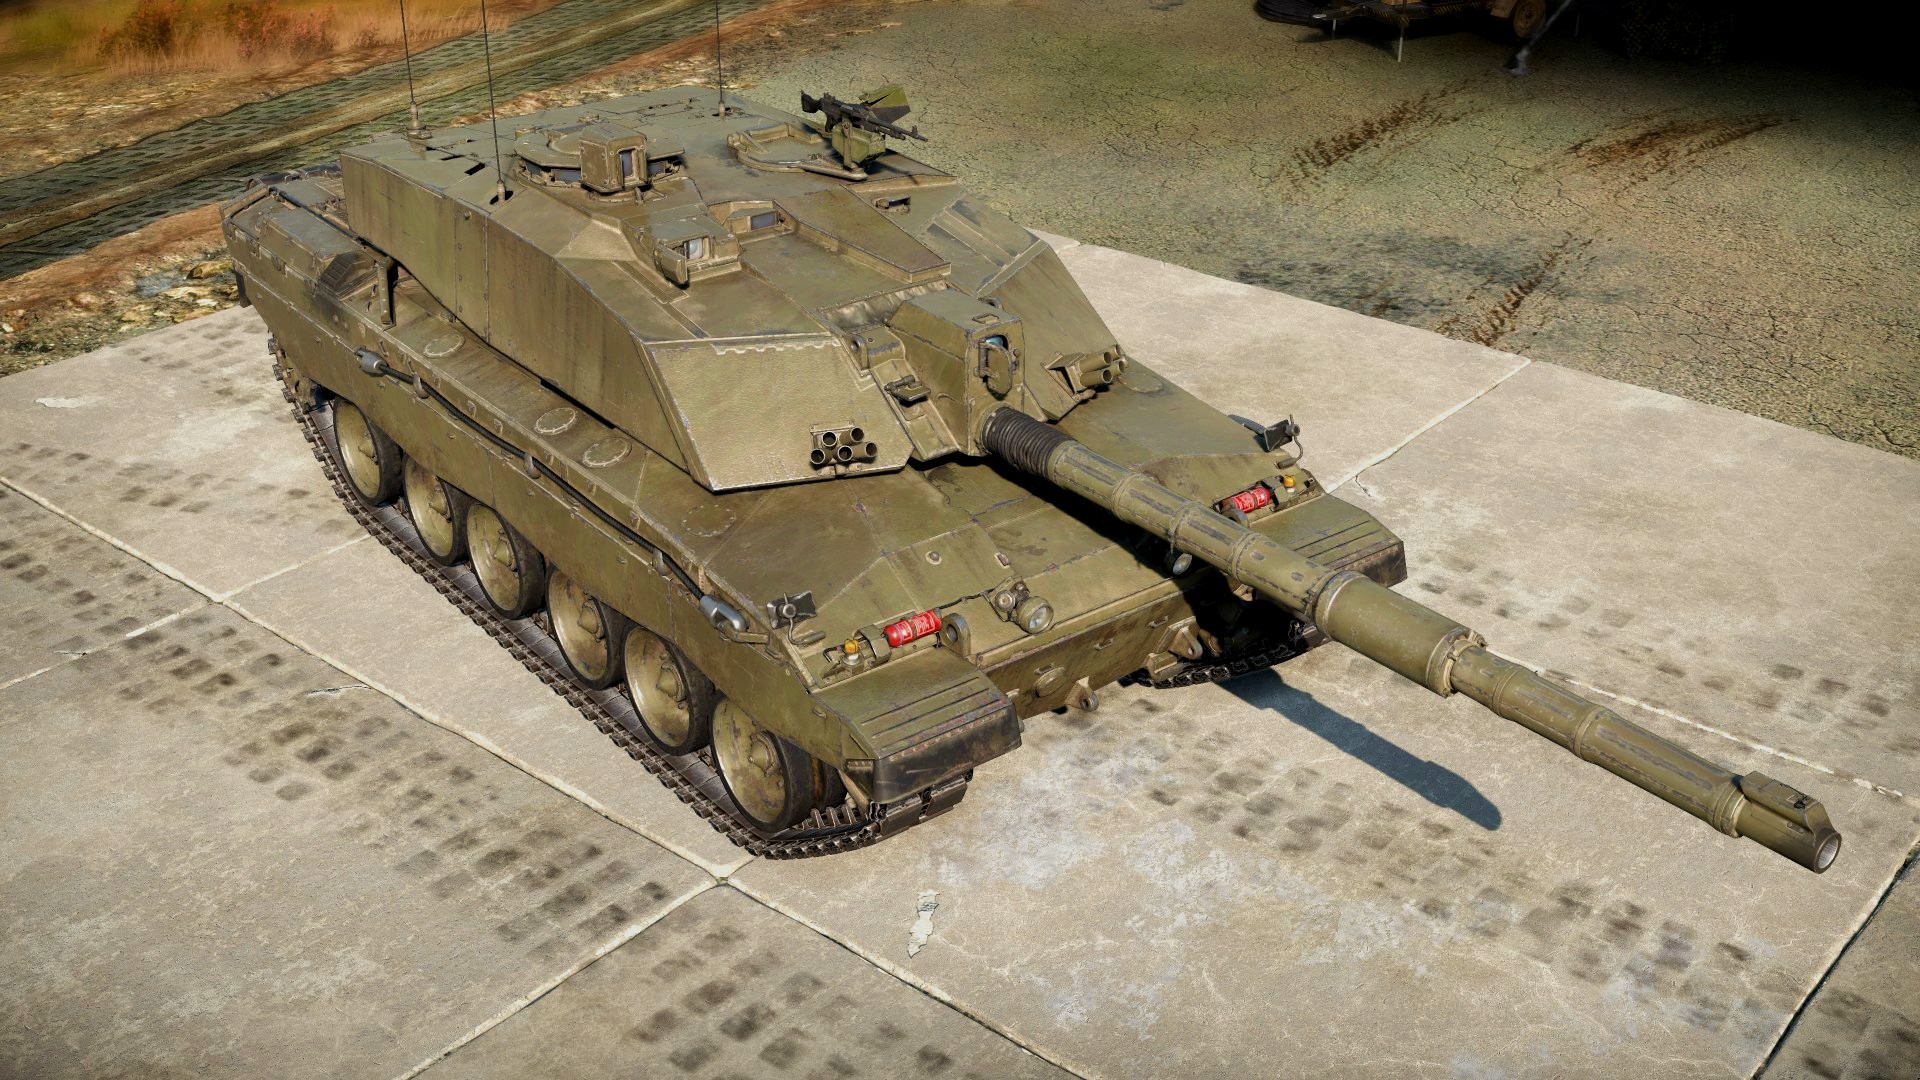 War Thunder devs won’t use classified documents posted in forums to tweak tanks